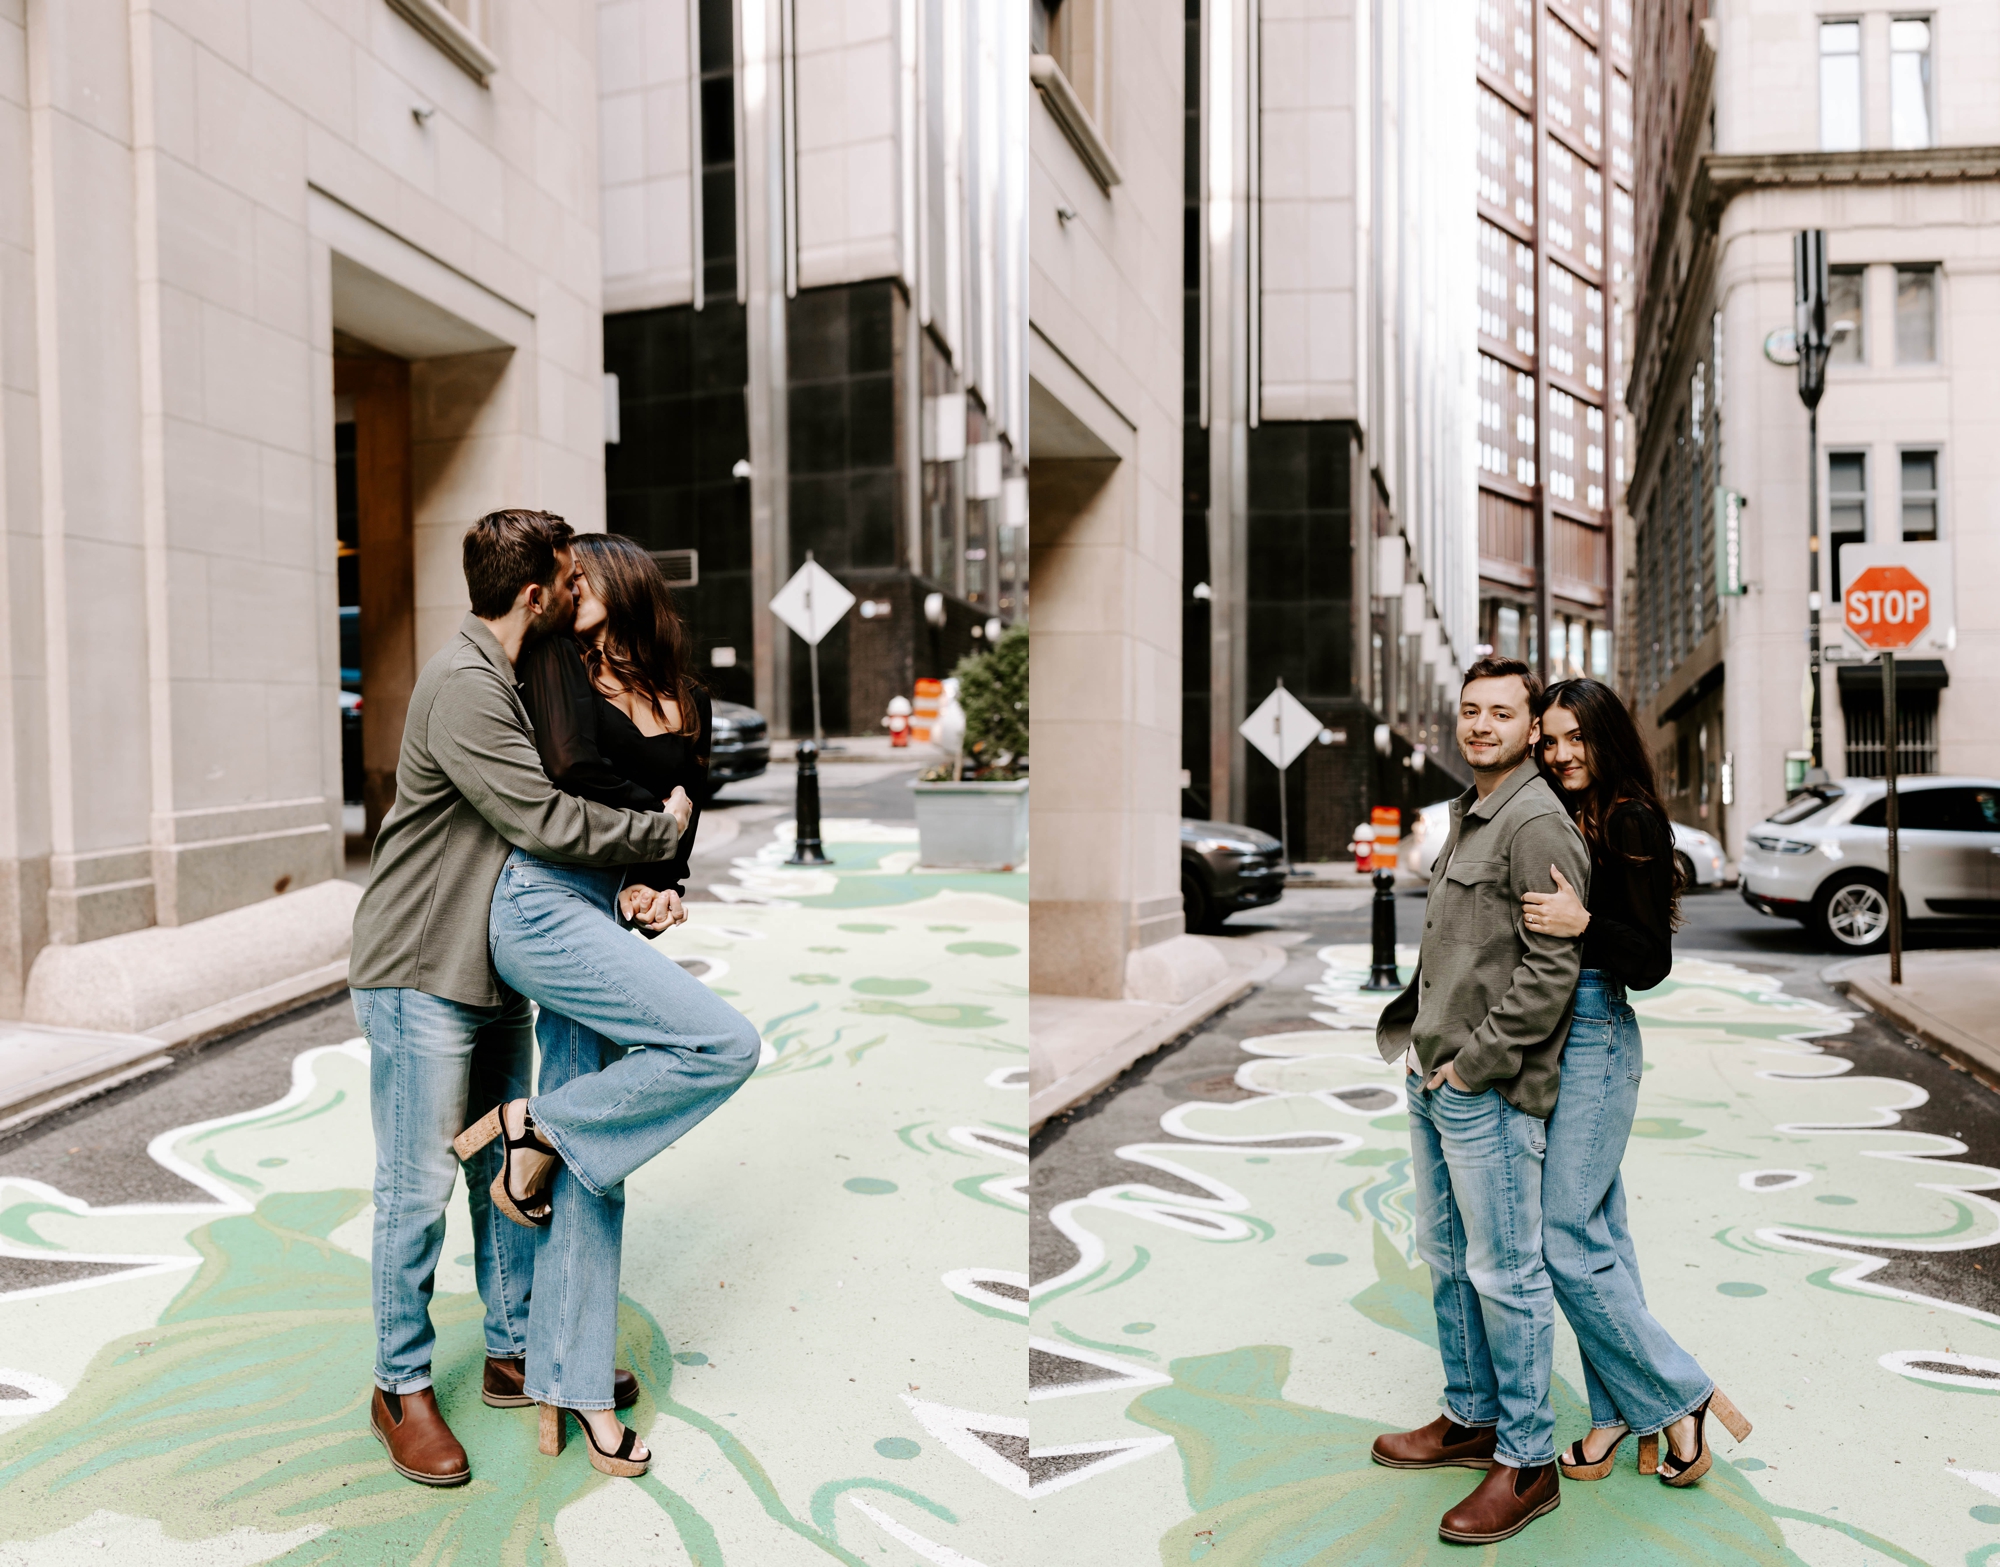 engagement photo ideas by Rachel Wehan Photography